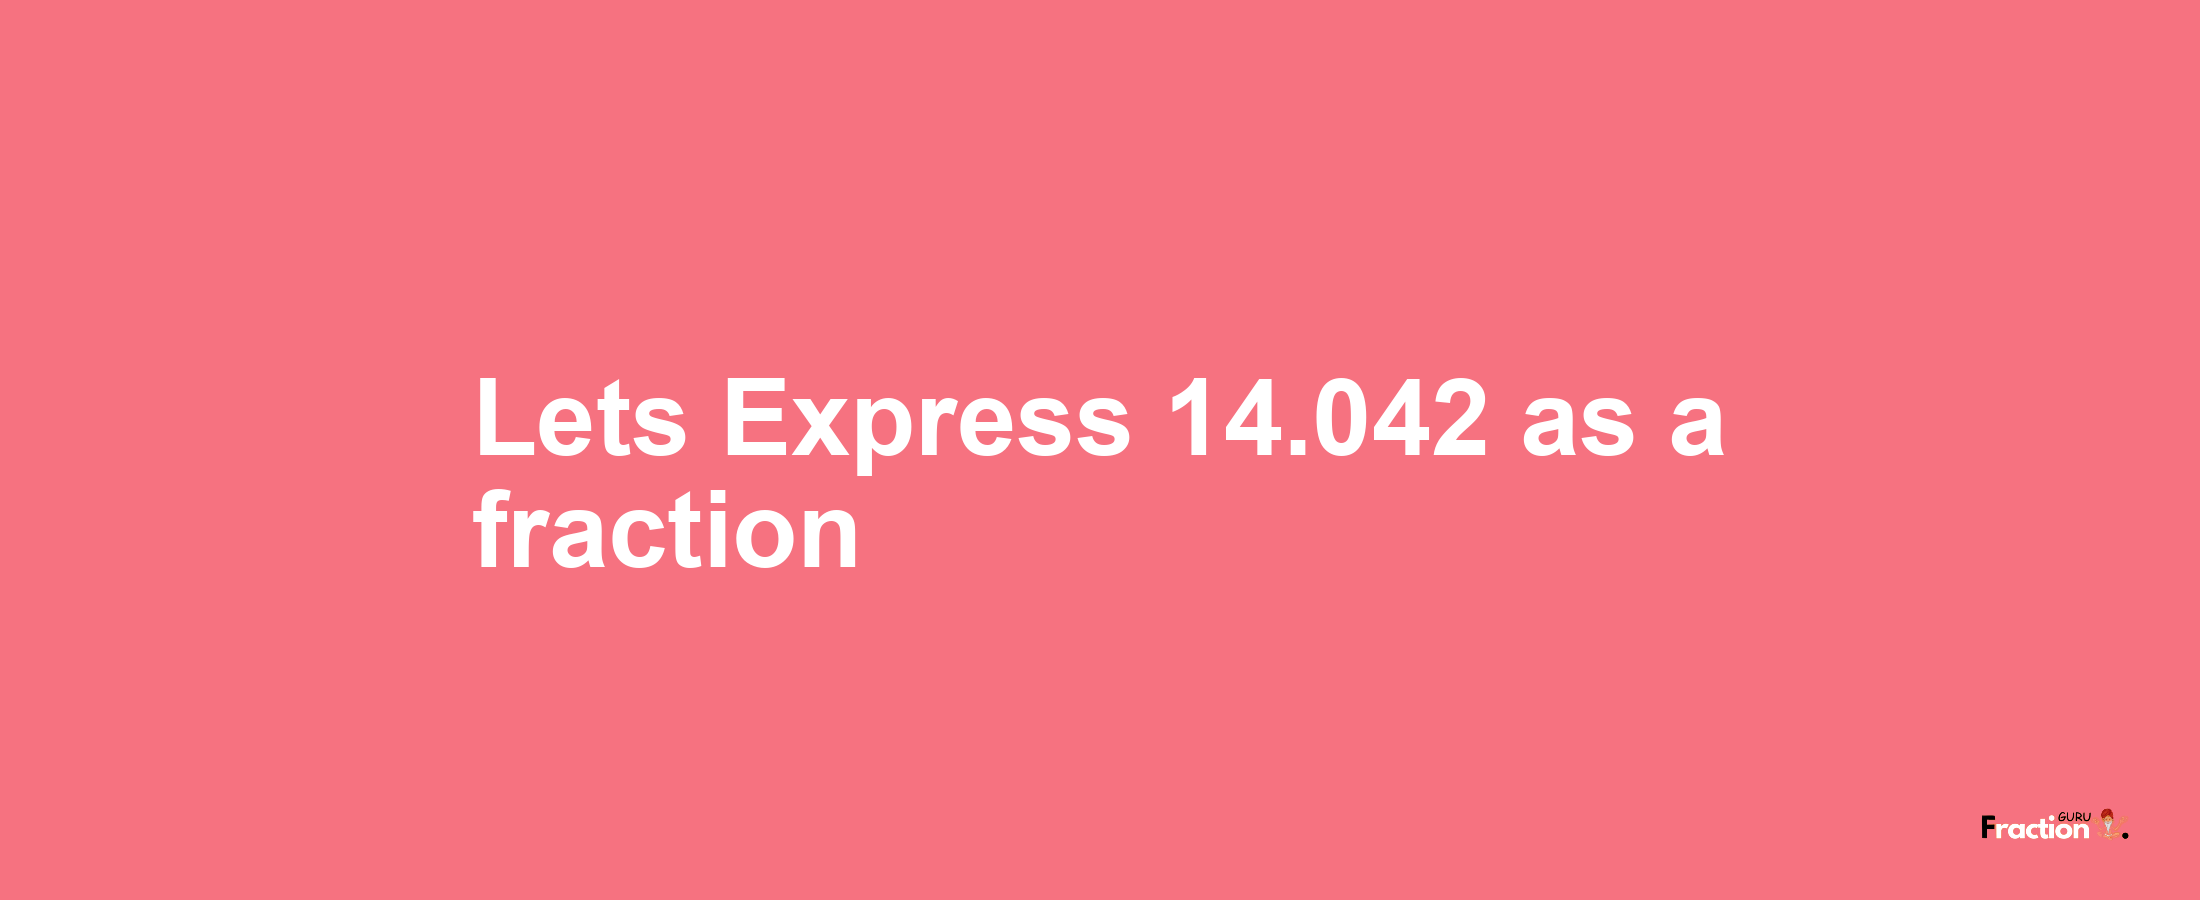 Lets Express 14.042 as afraction